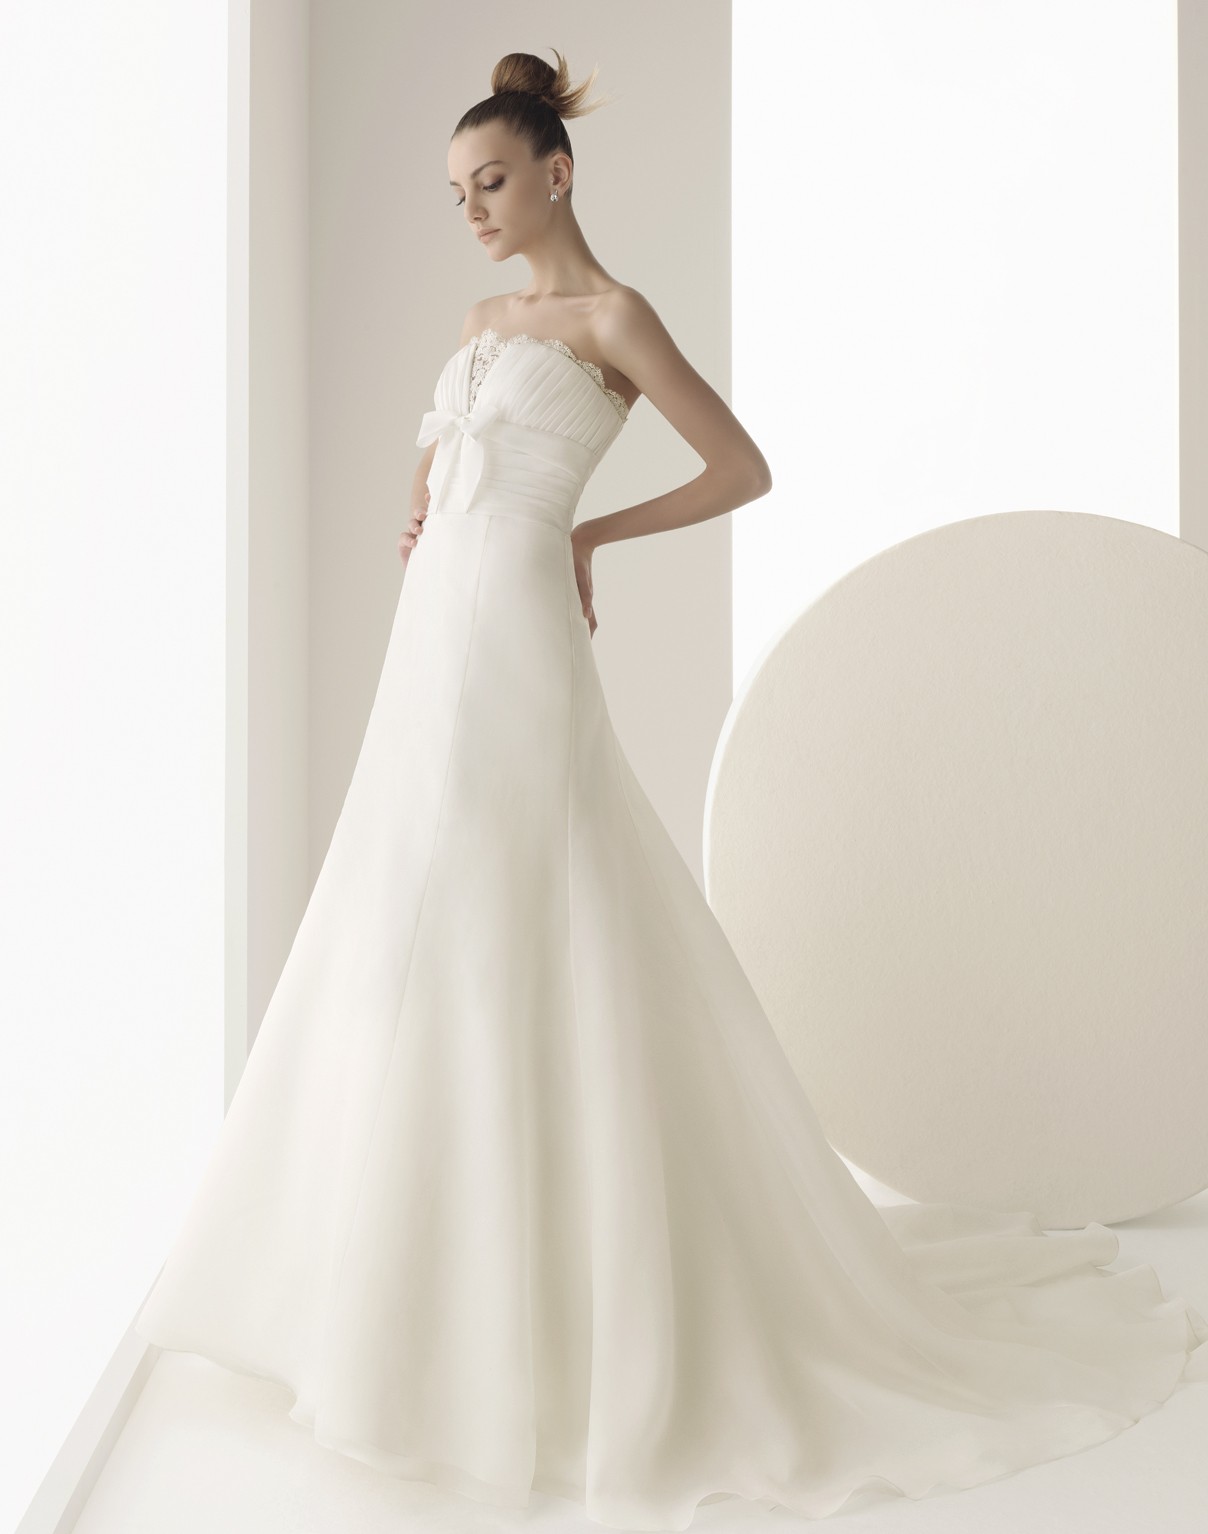 White bridal gown by Peter Trends Bridal